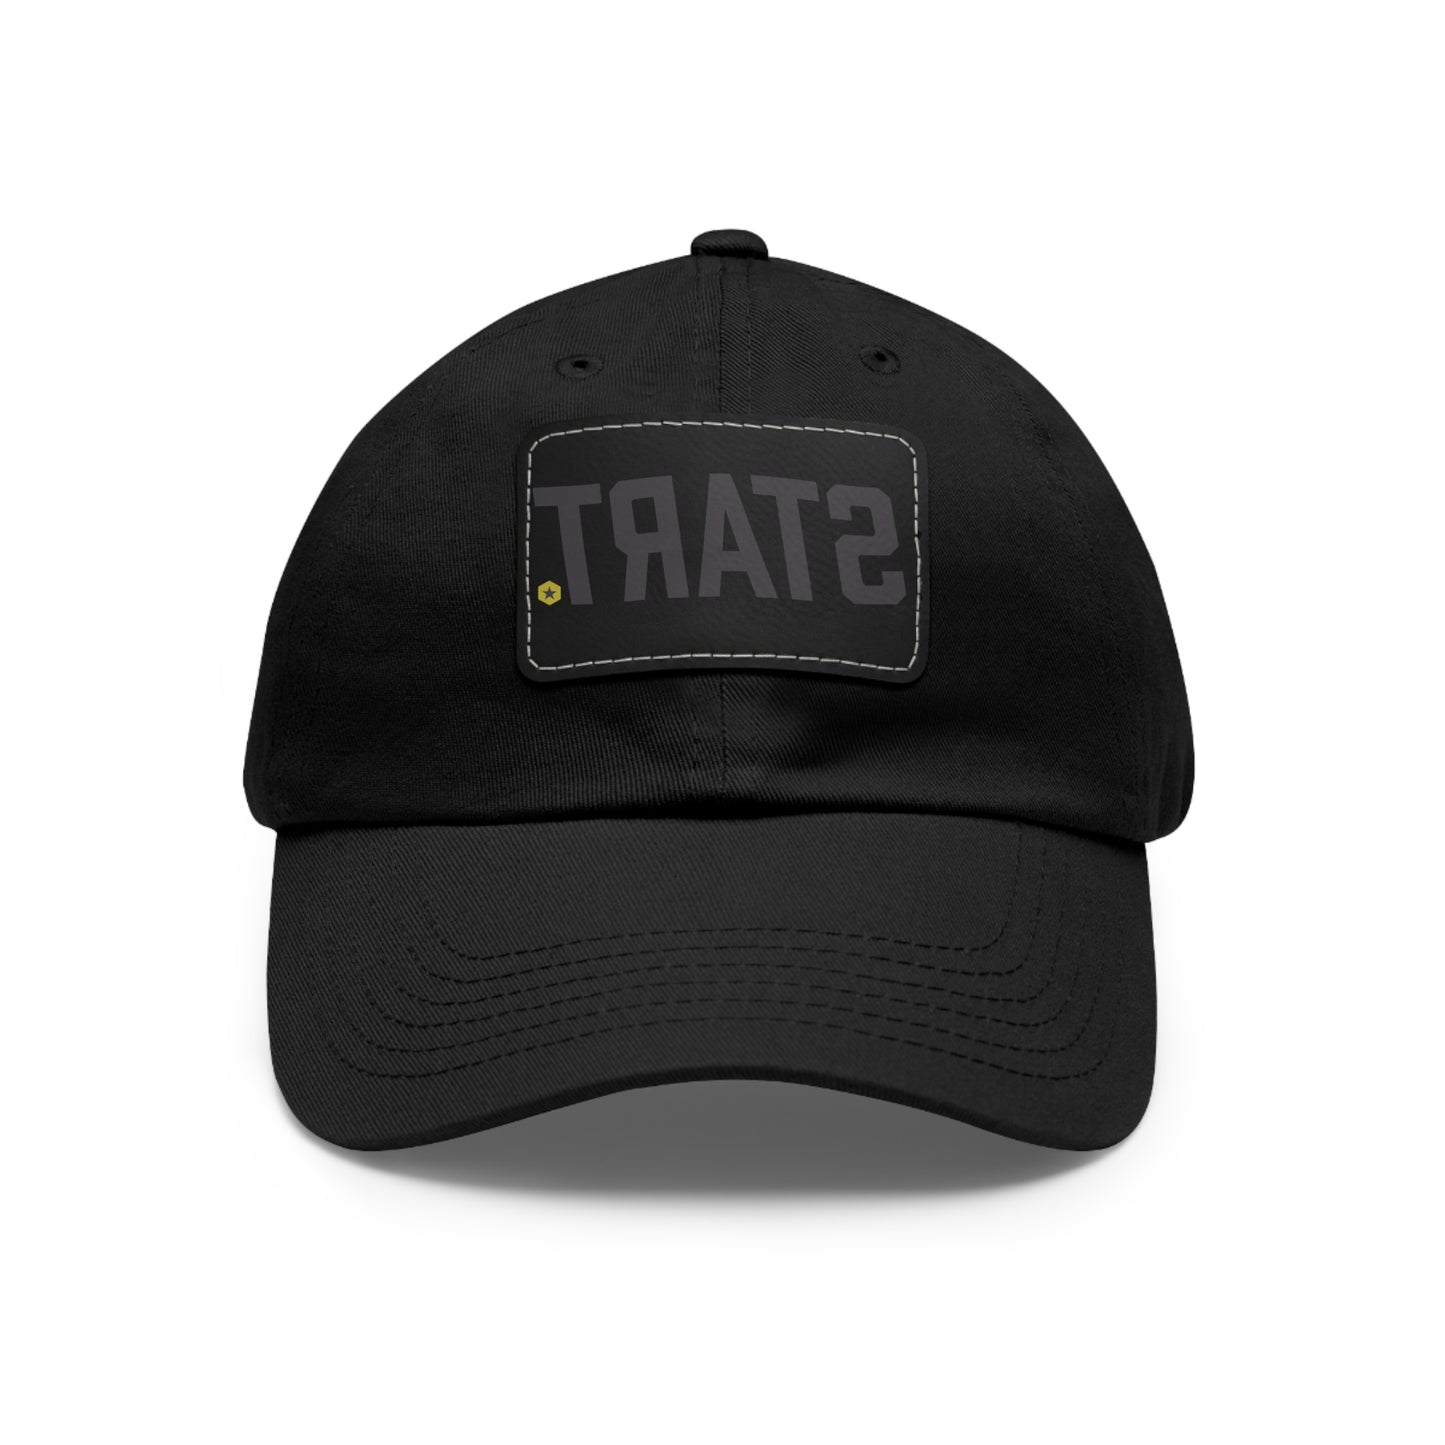 Start Hat with Leather Patch